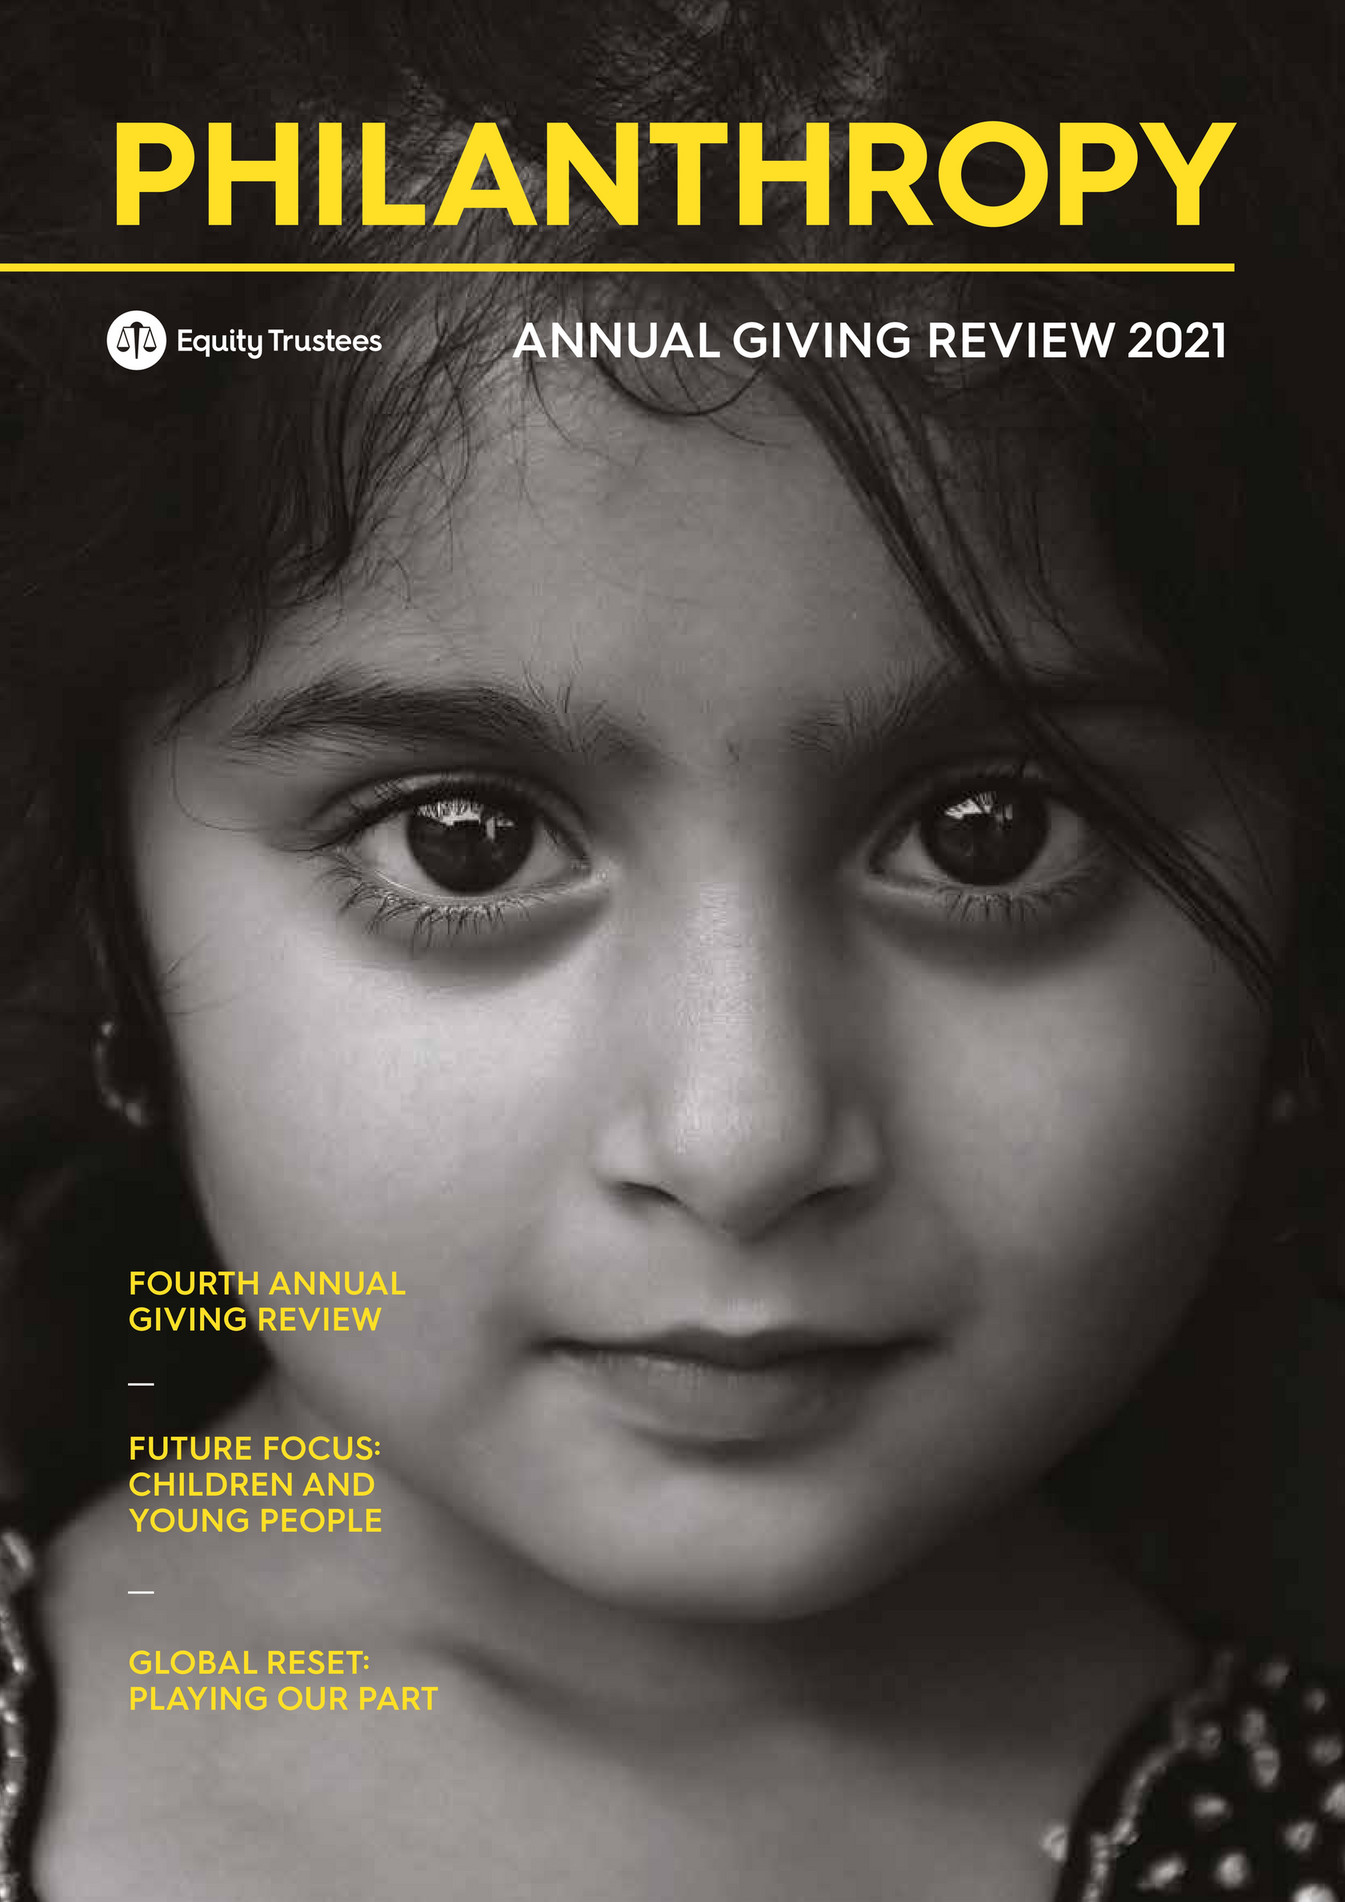 equity-trustees-philanthropy-2021-annual-giving-review-page-32-33